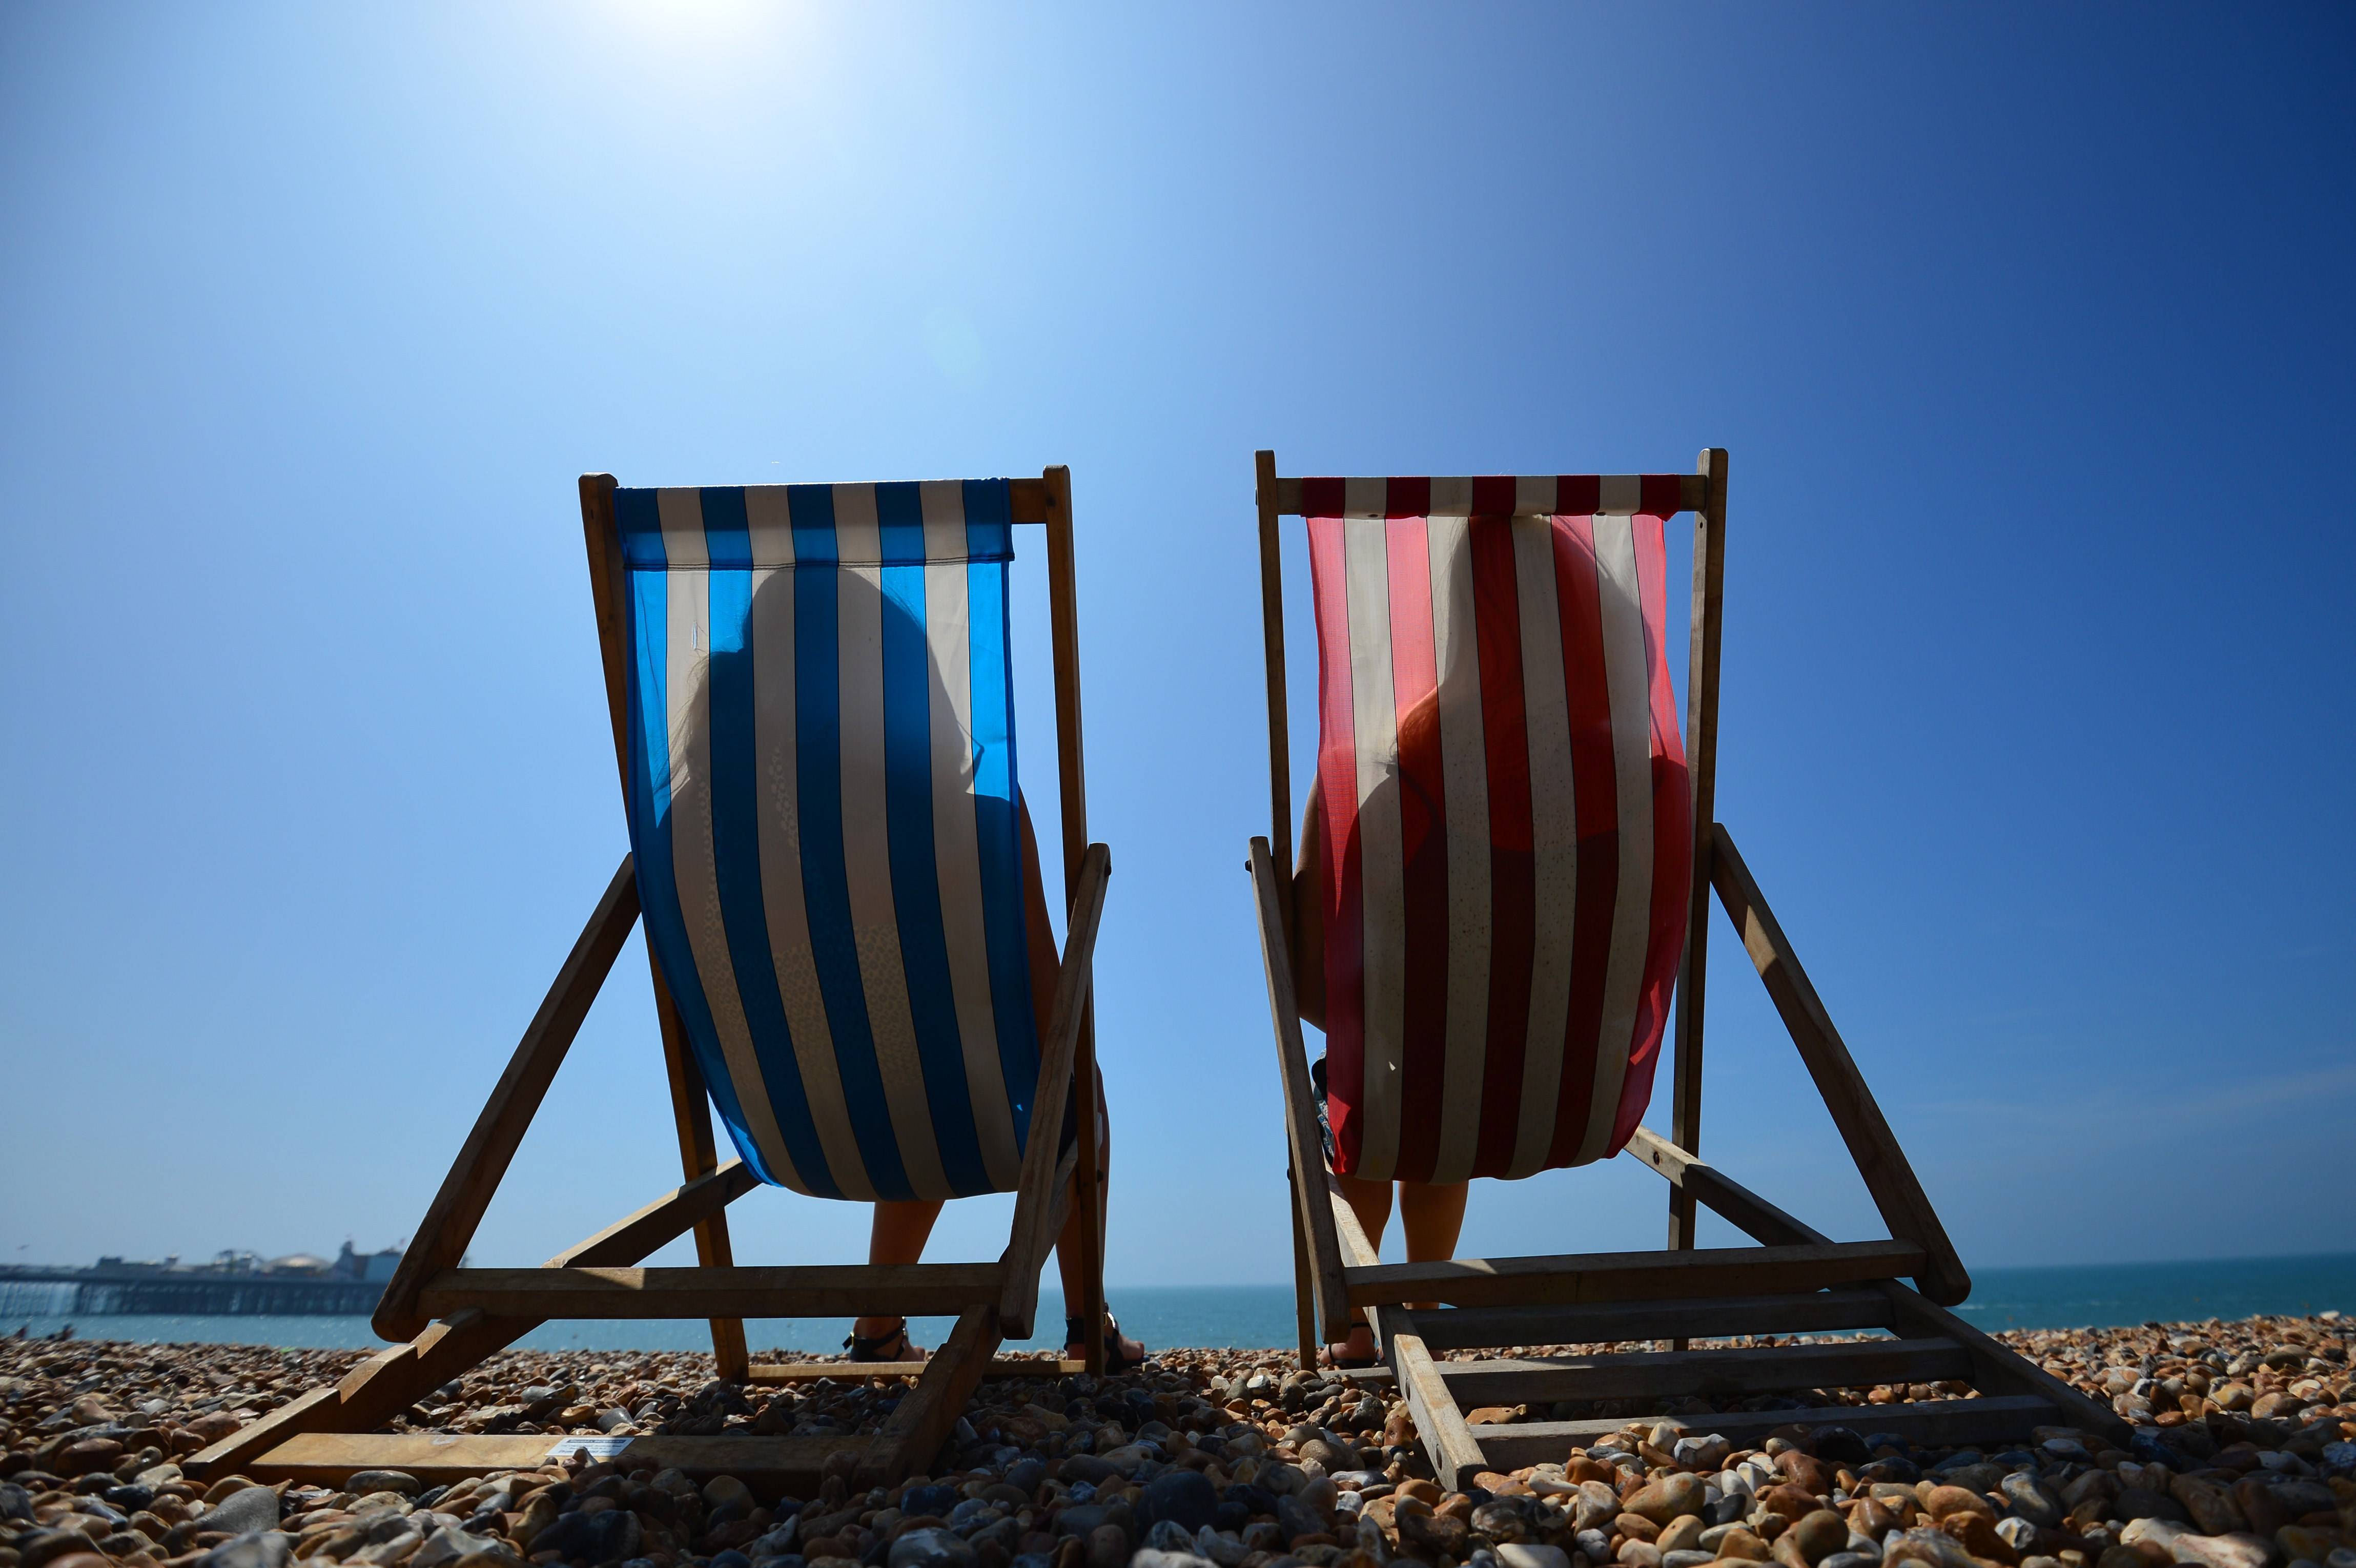 People relax in deck chairs on the beach in Brighton on July 18, 2014, as parts of the country were expected to experience the hottest day of the year so far and the Met Office issued a heatwave alert for southern England and the Midlands.  AFP PHOTO / CARL COURT        (Photo credit should read CARL COURT/AFP/Getty Images)